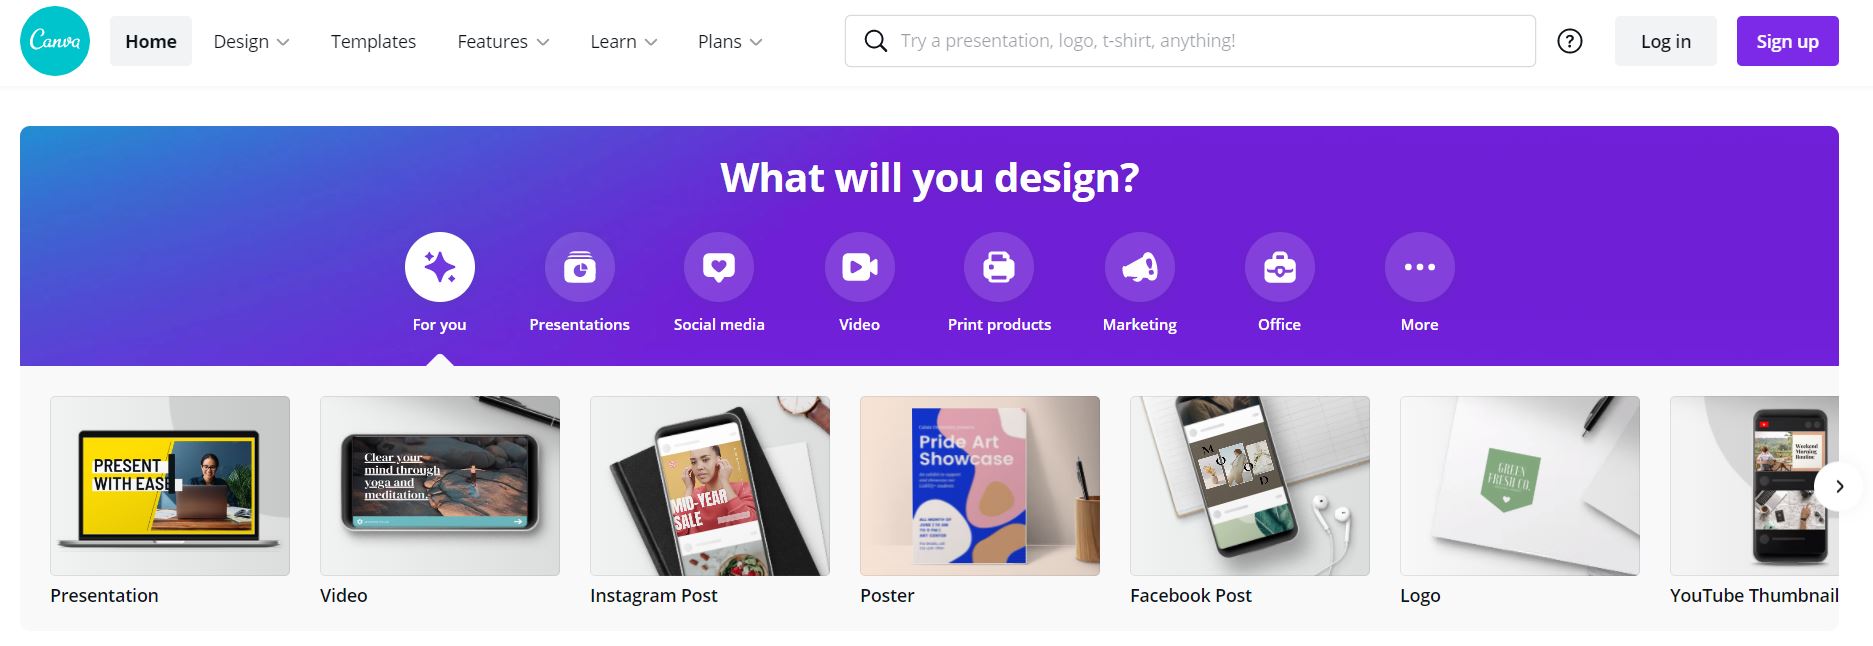 Canva helps you design beautiful graphics for your blog and social media pages.